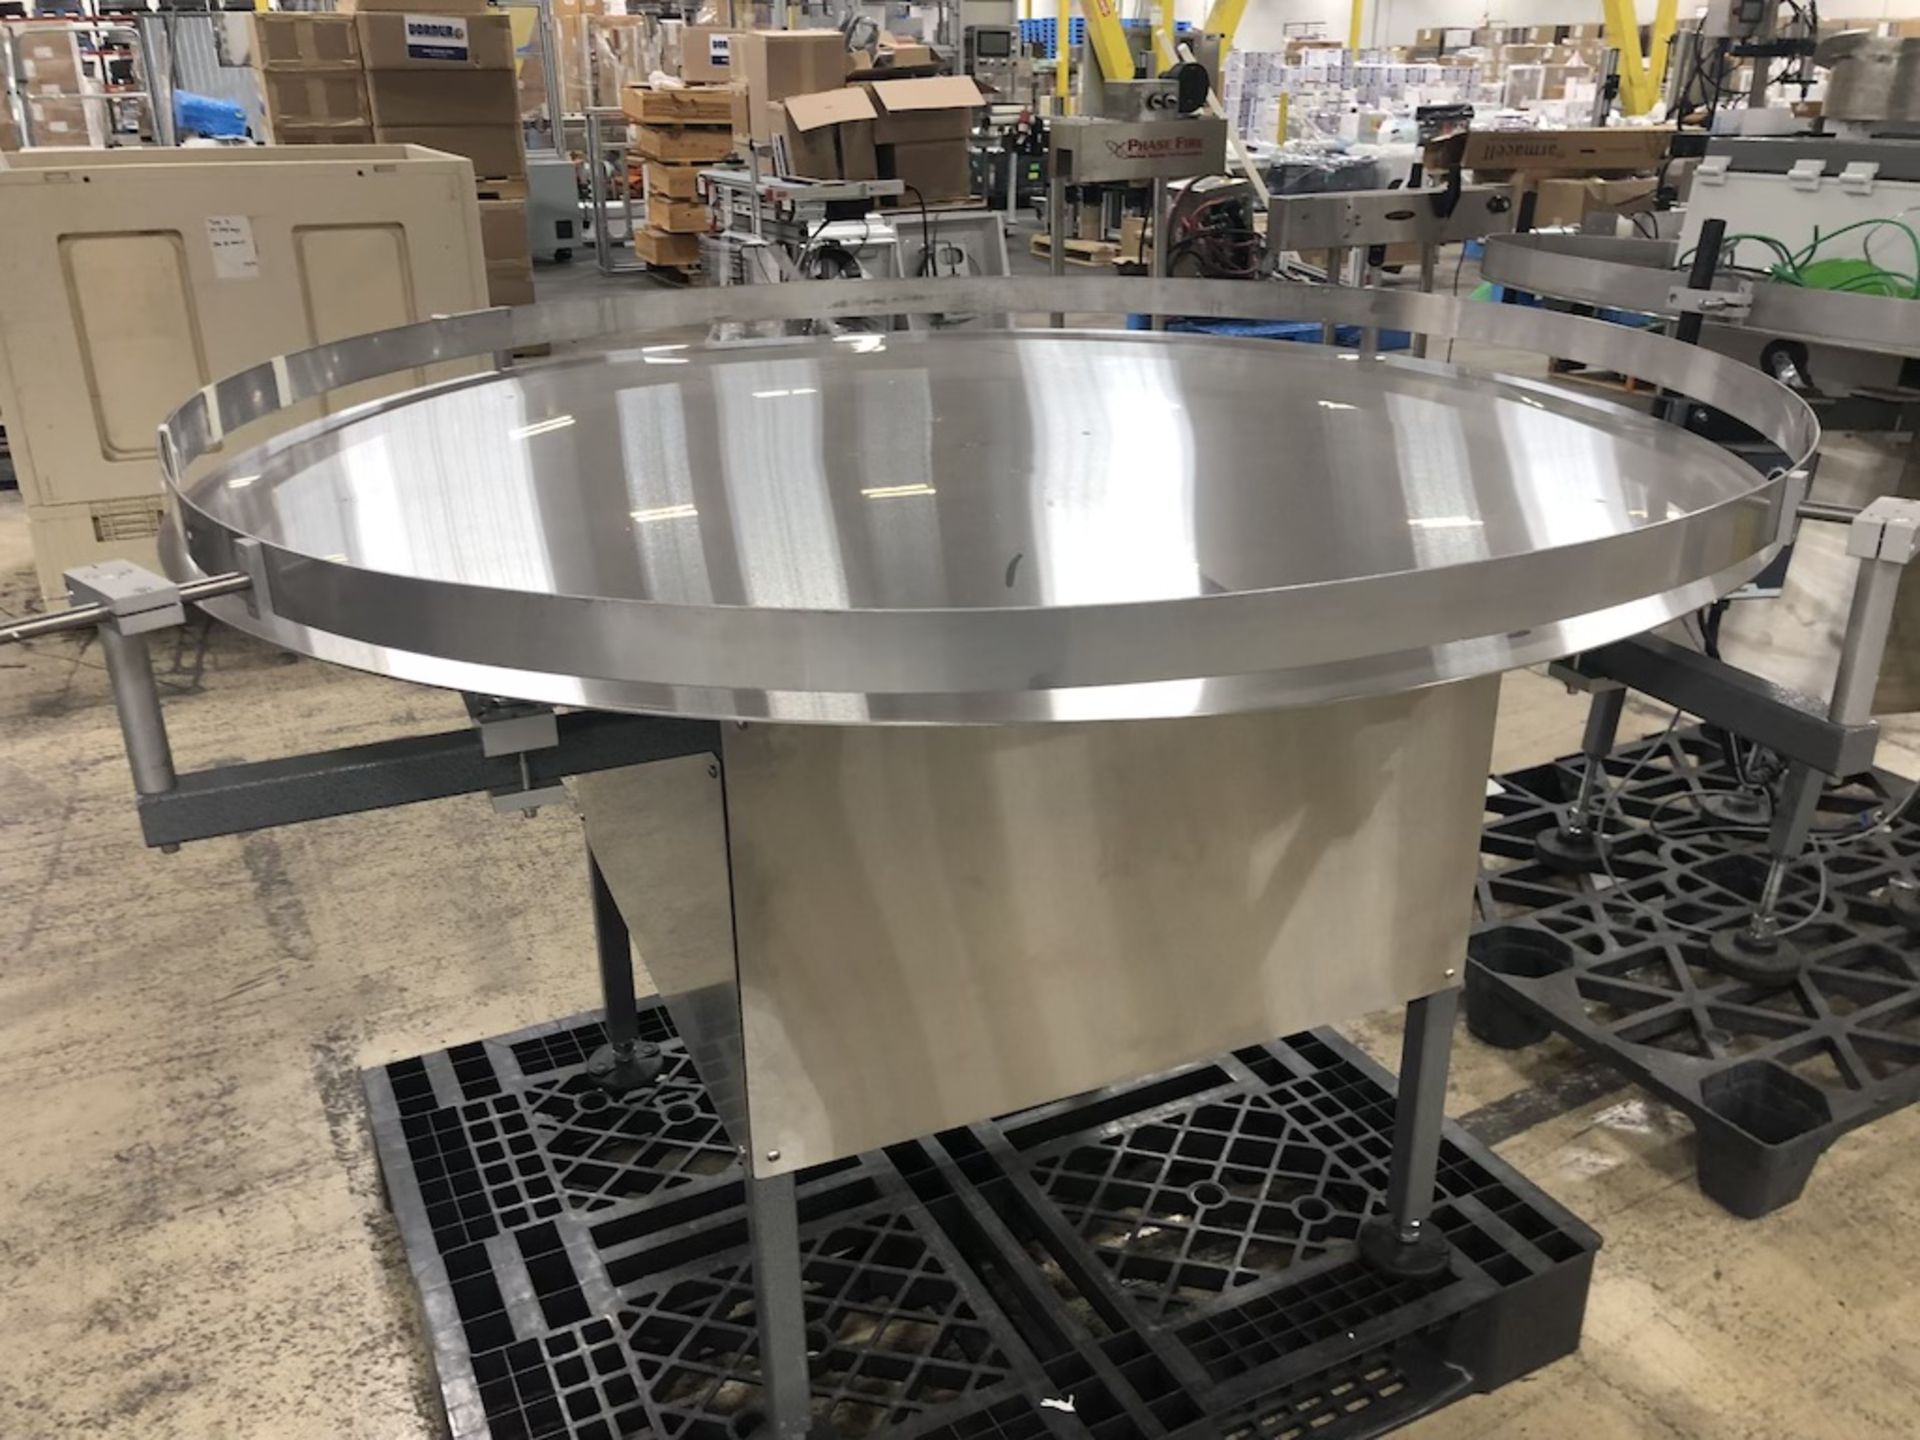 59" IN CIRCULAR SORTING TABLE / UNSCRAMBLING TABLE WITH PENTA KB DRIVE DC MOTOR SPEED CONTROL MODEL: - Image 5 of 7